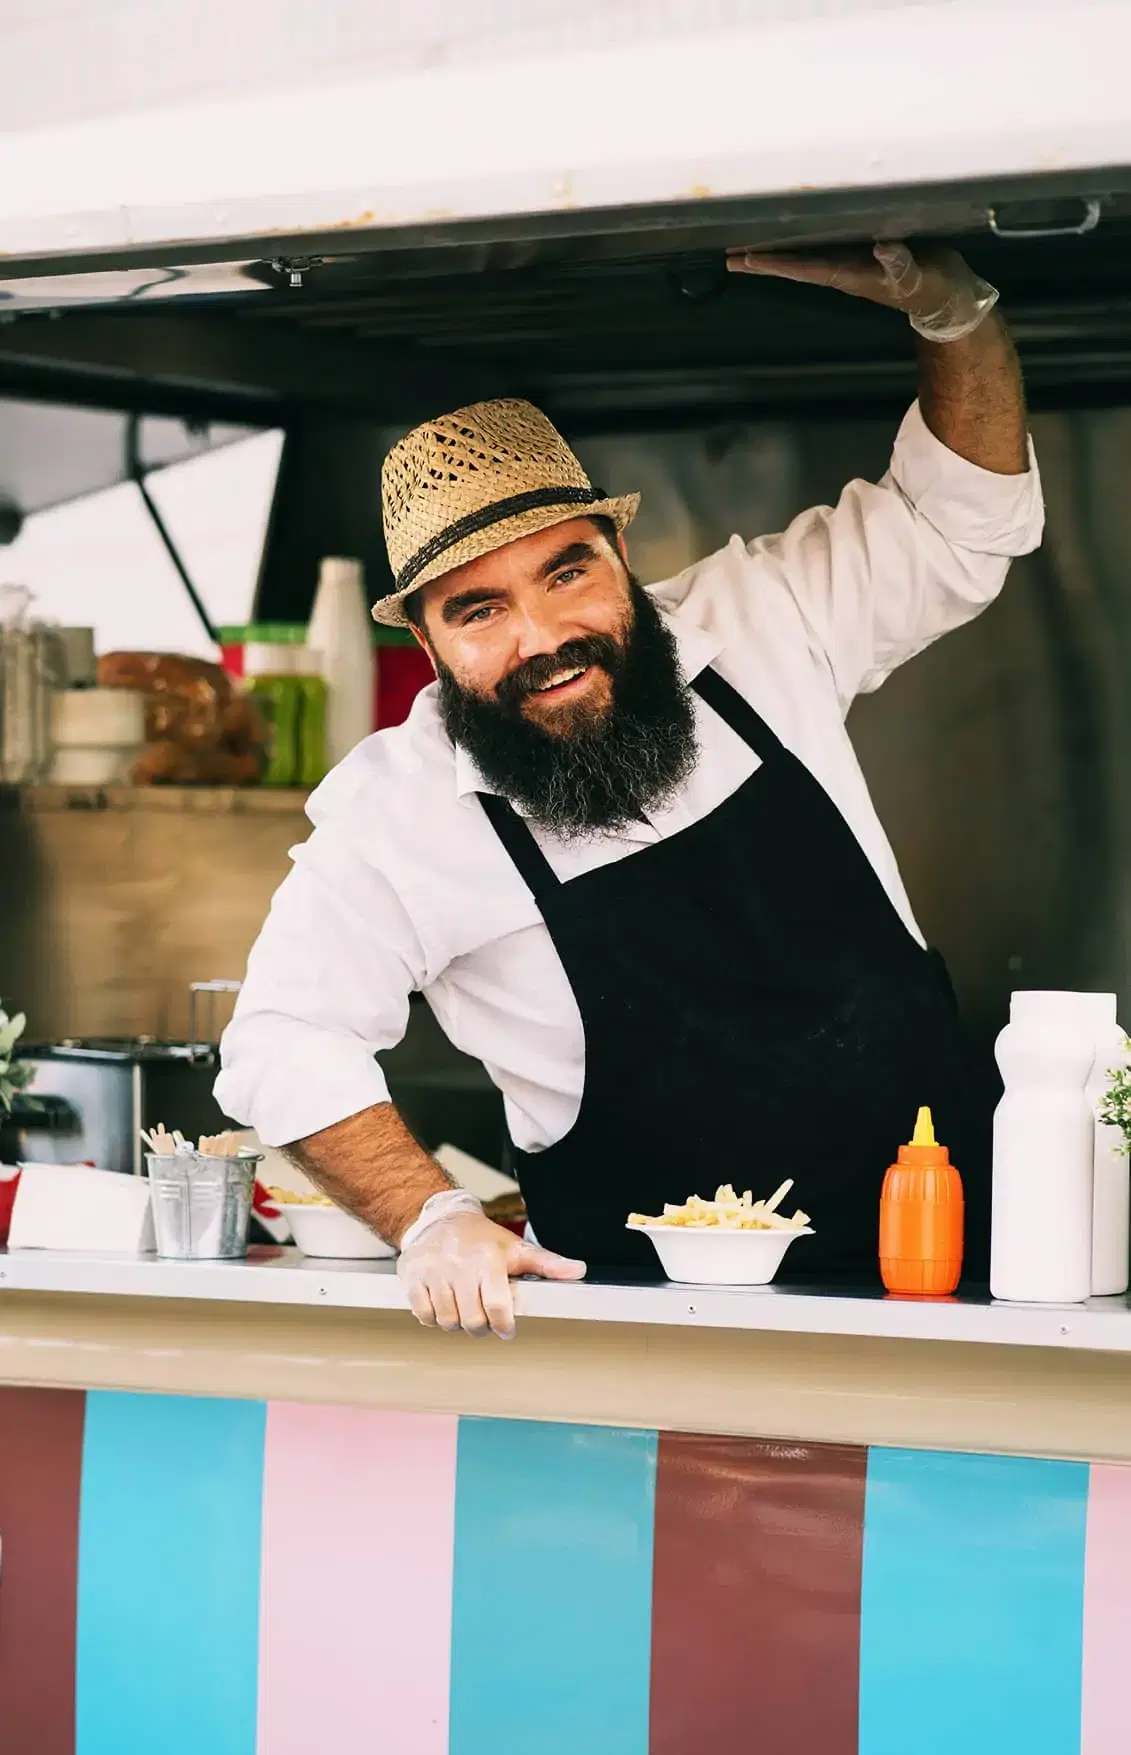 Friendly food truck owner smiling through his service window